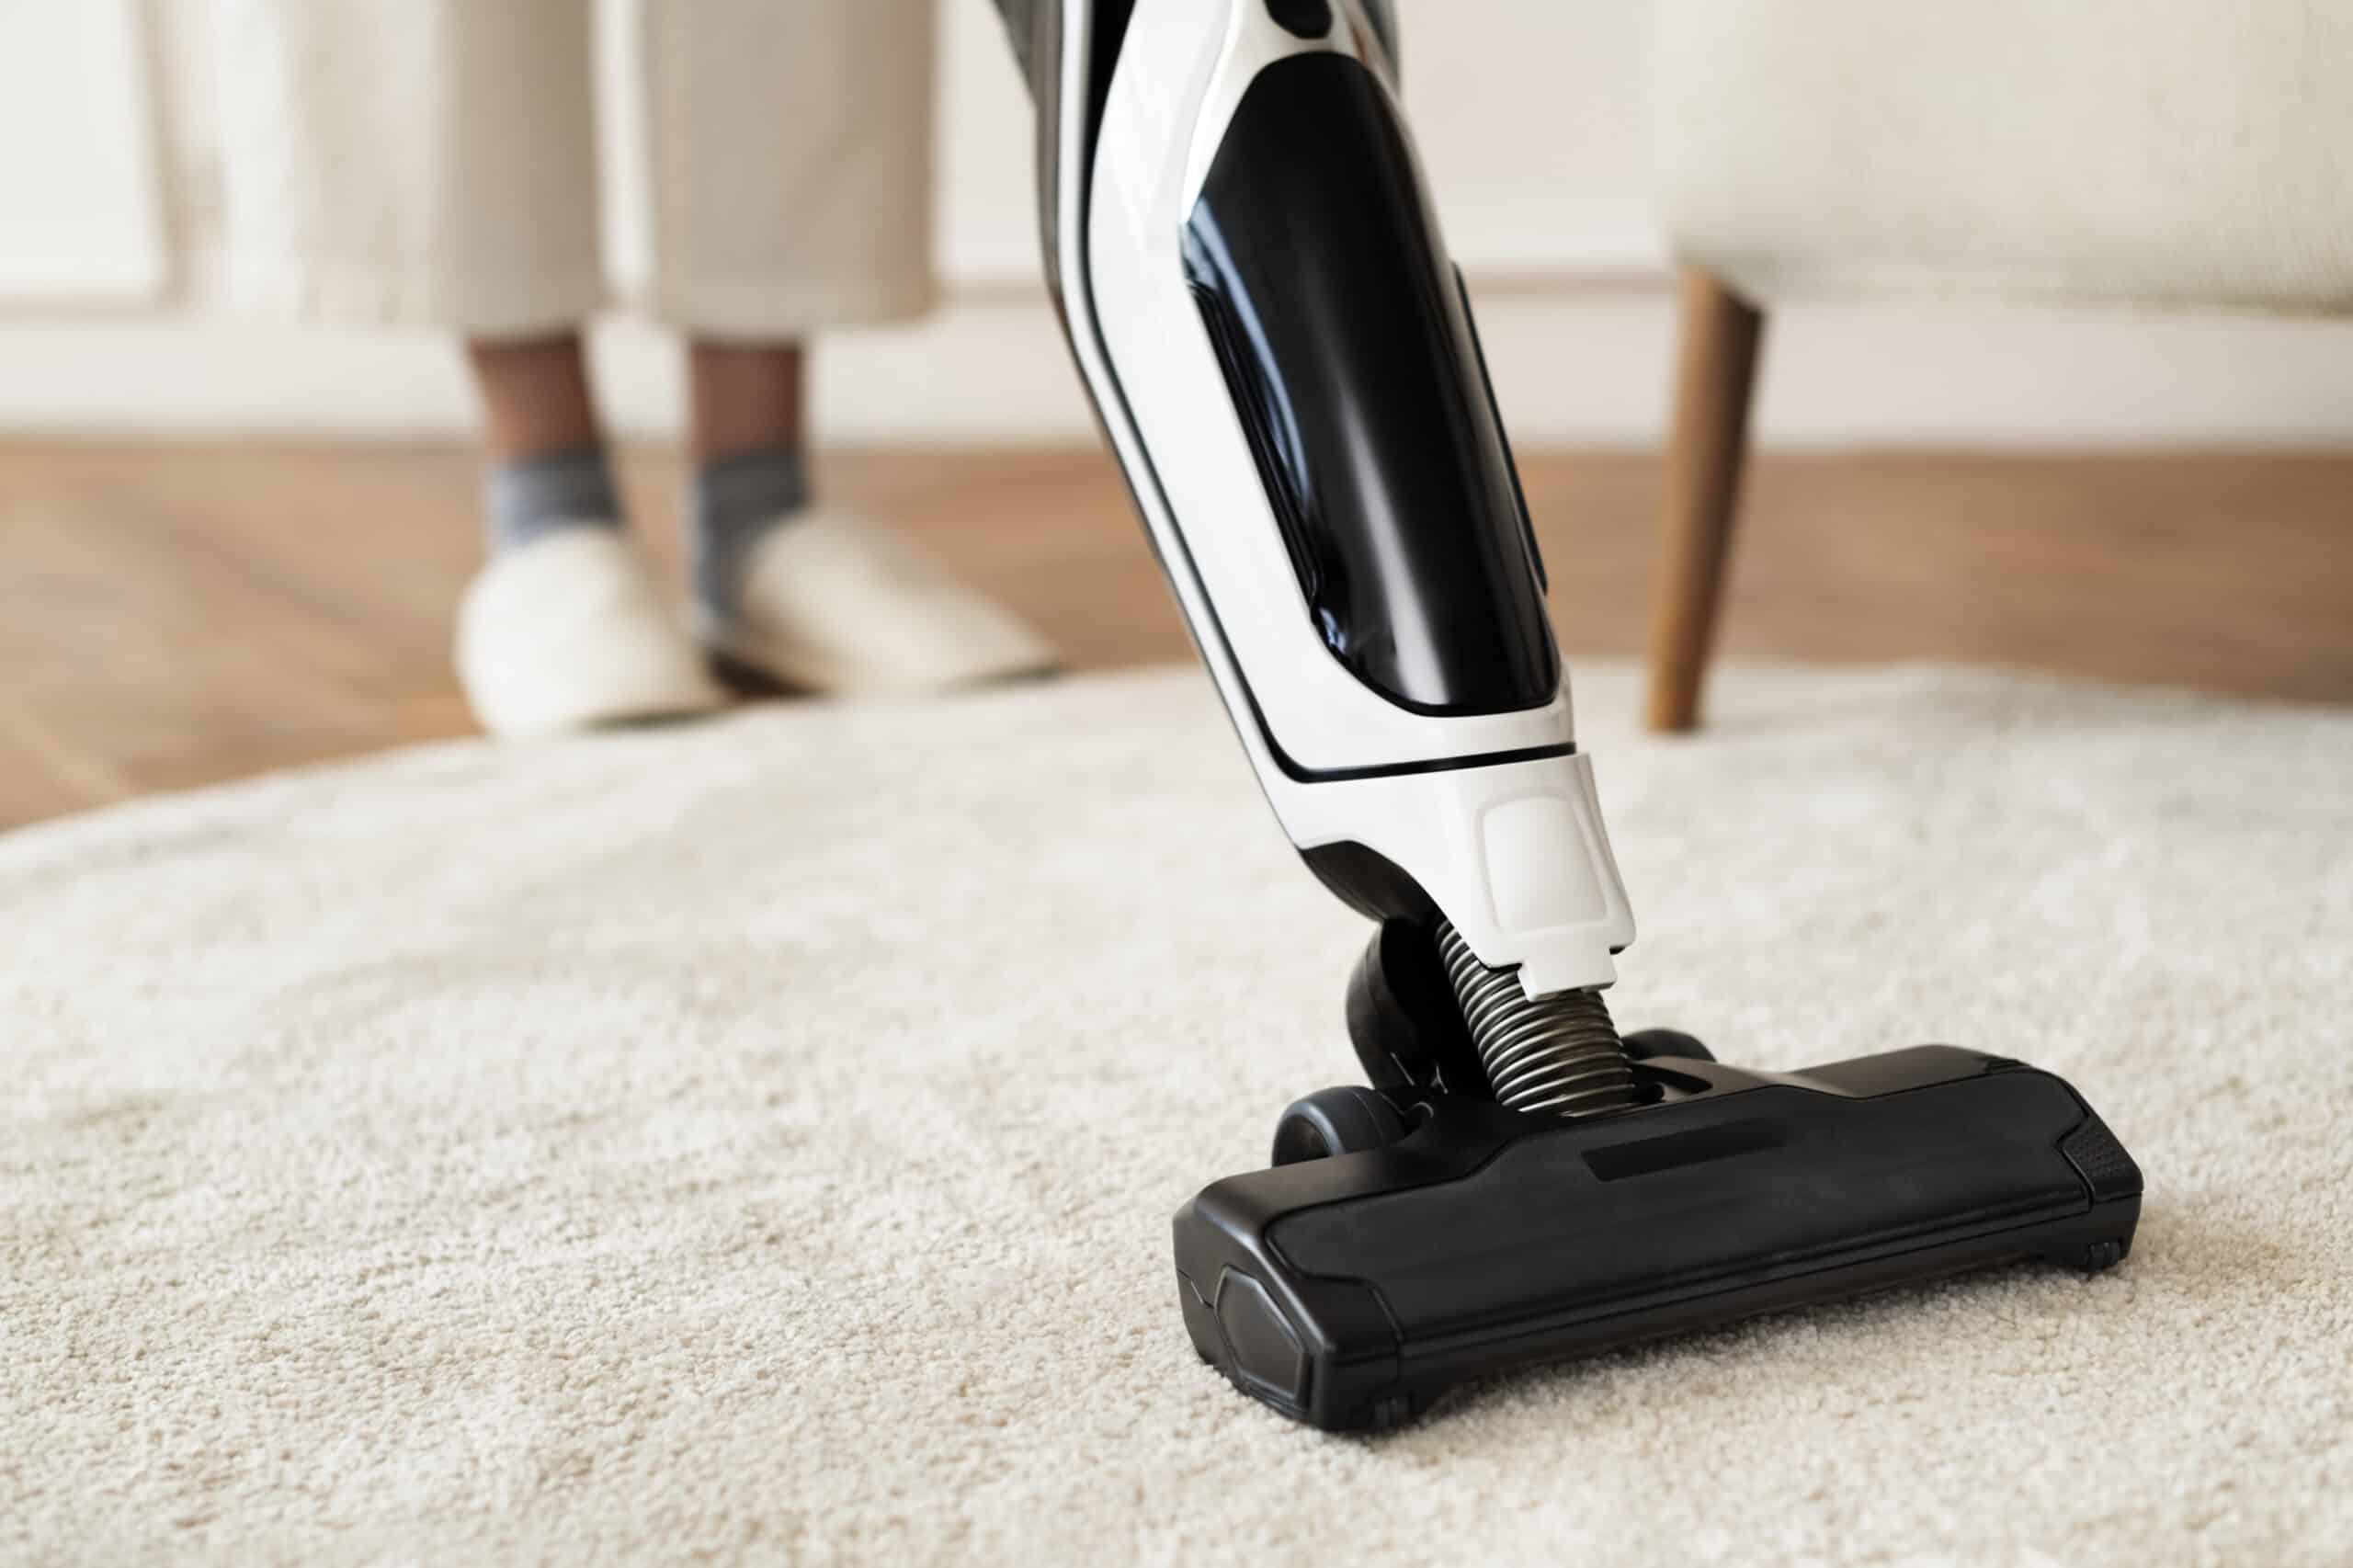 Will carpet cleaning help a matted carpet?